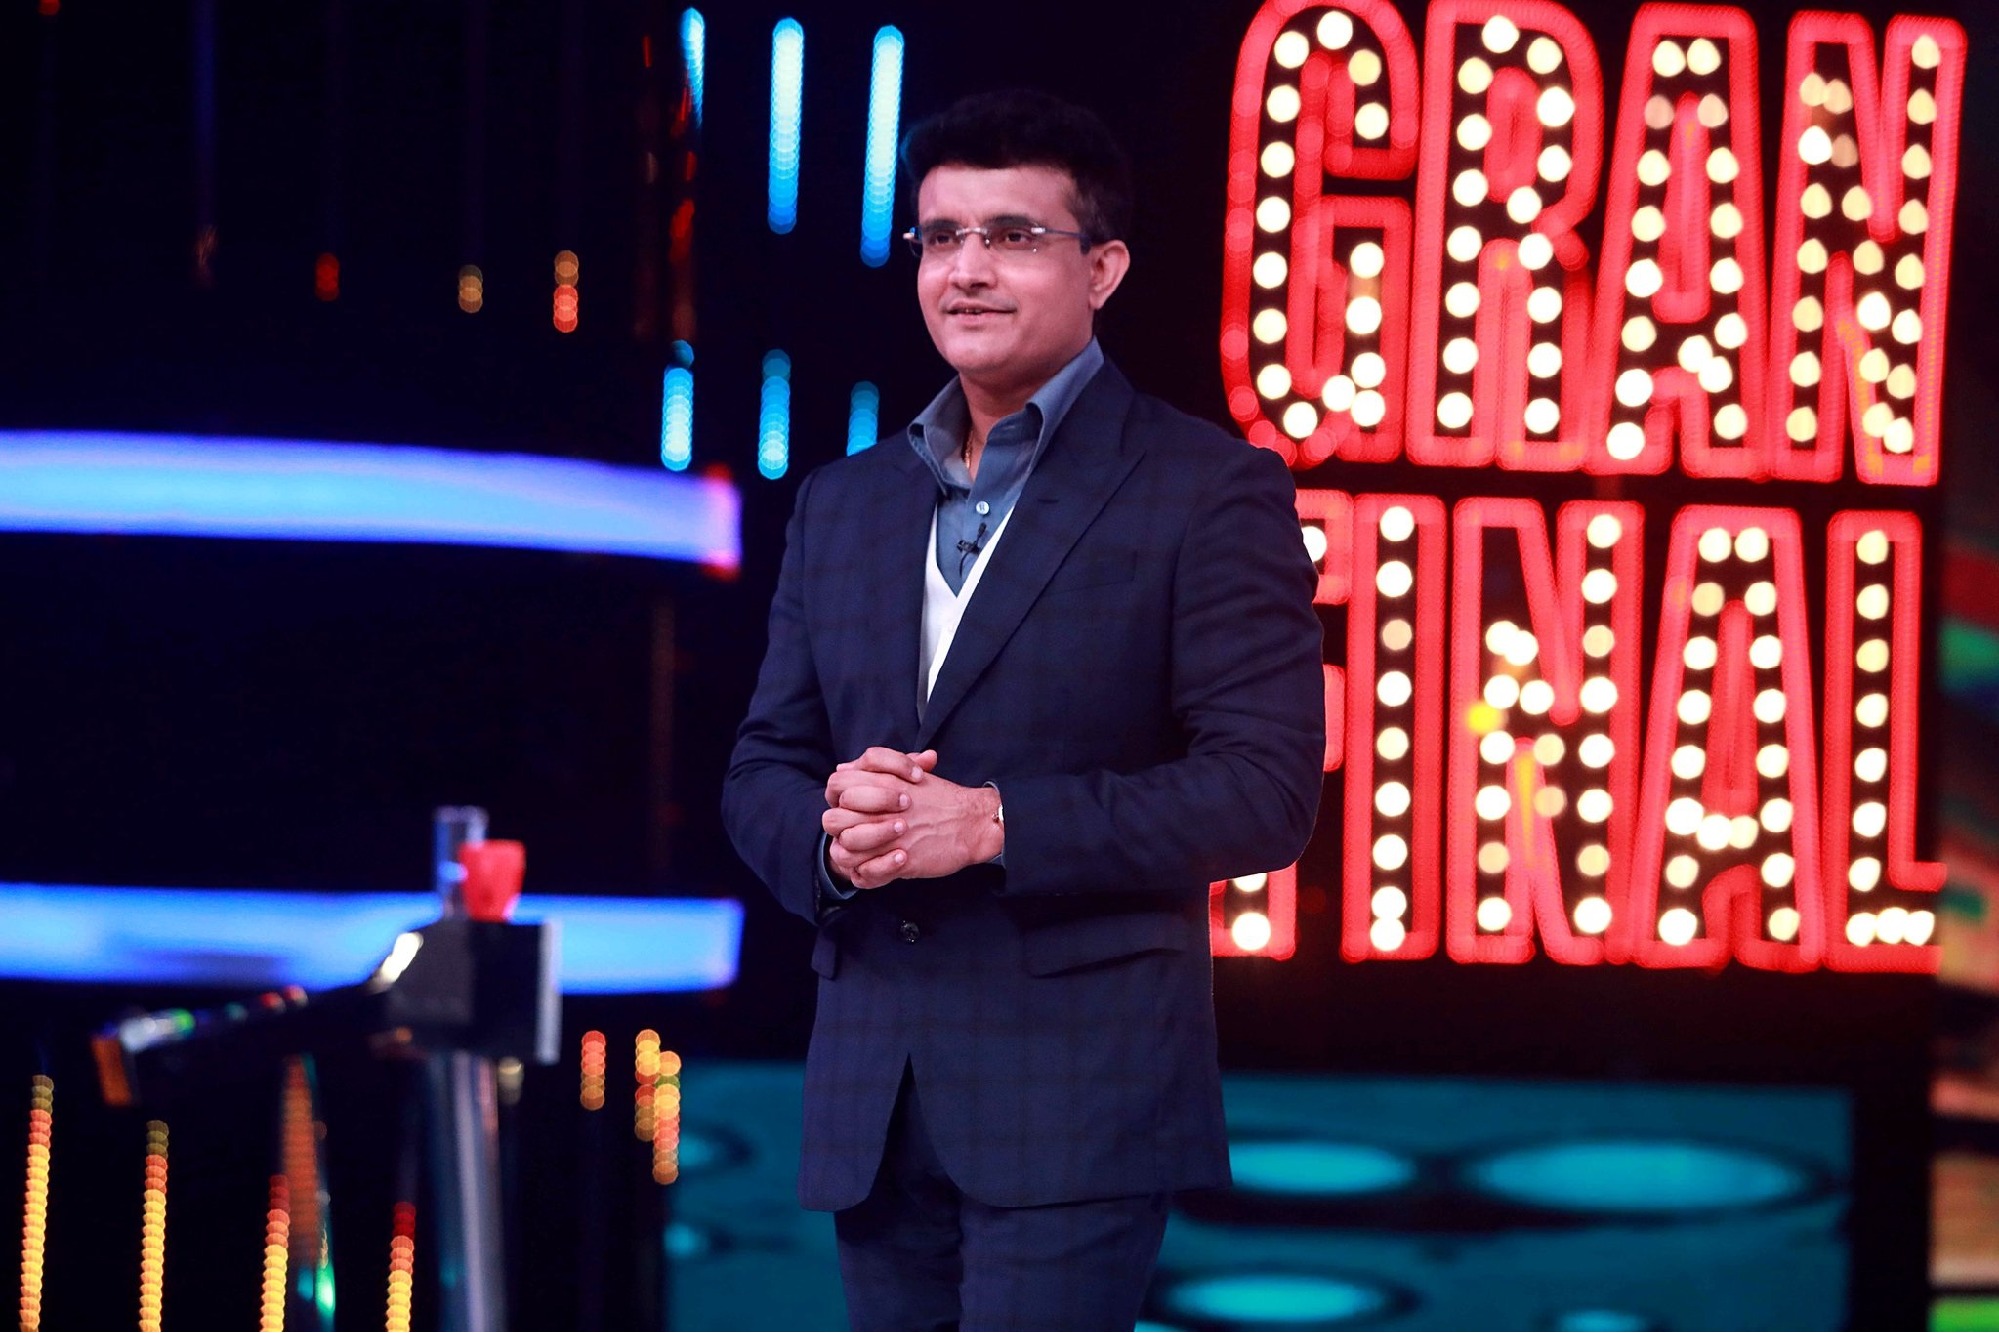 Sourav Ganguly suffered a mild cardiac arrest and has been admitted to hospital